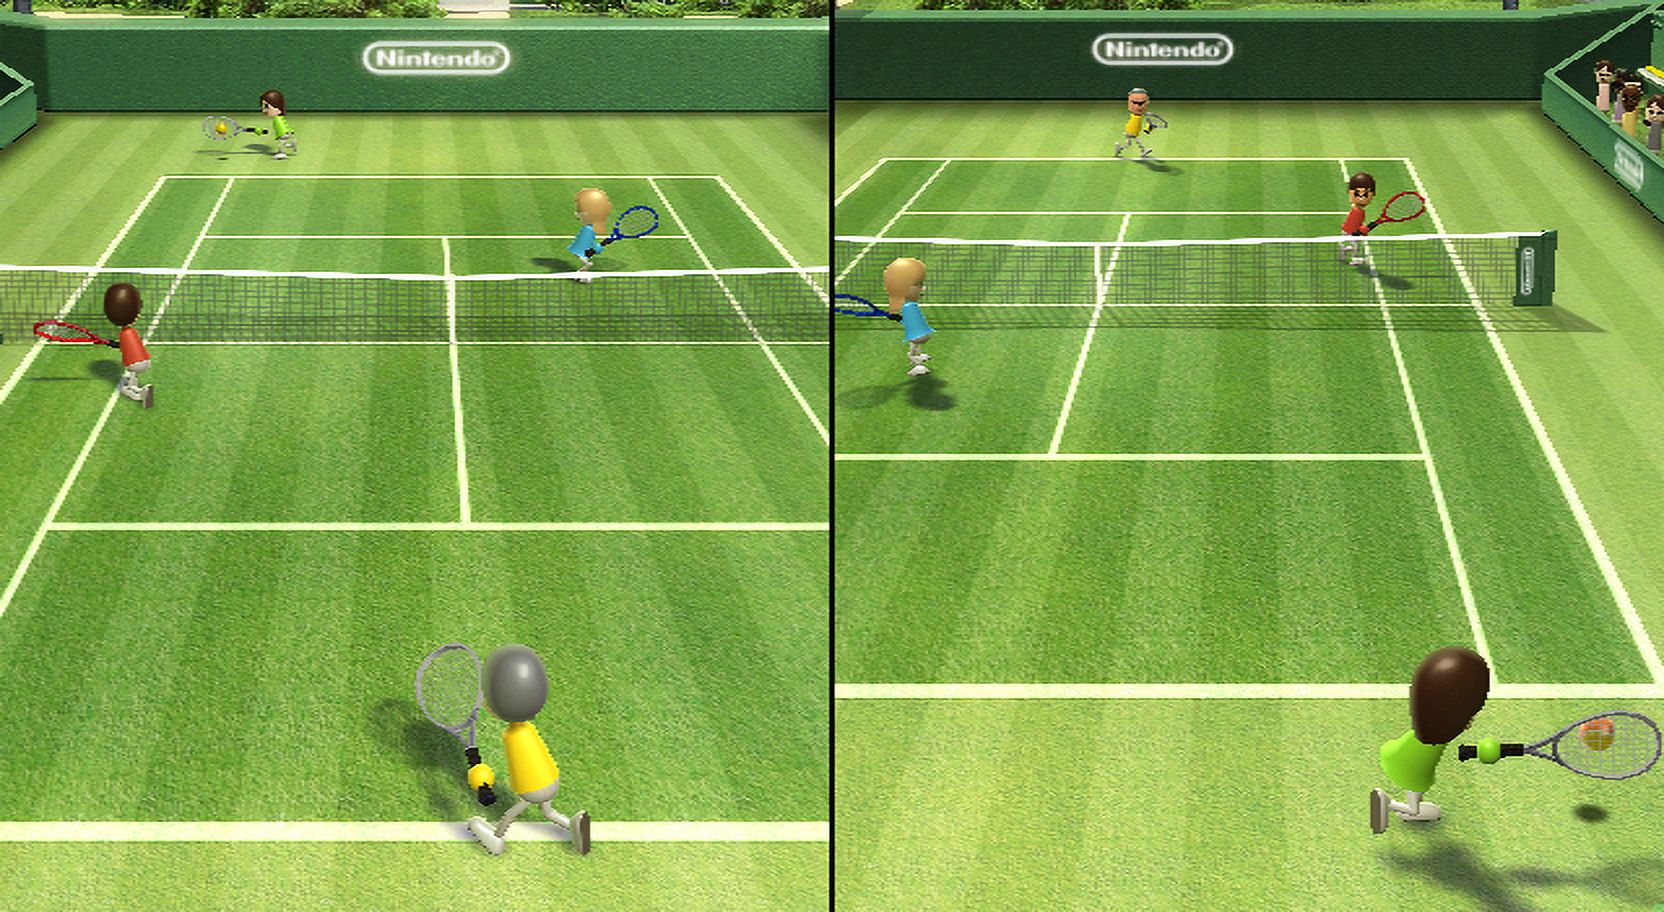 Wii Sports - Nintendo Selects (Wii) - image 5 of 5